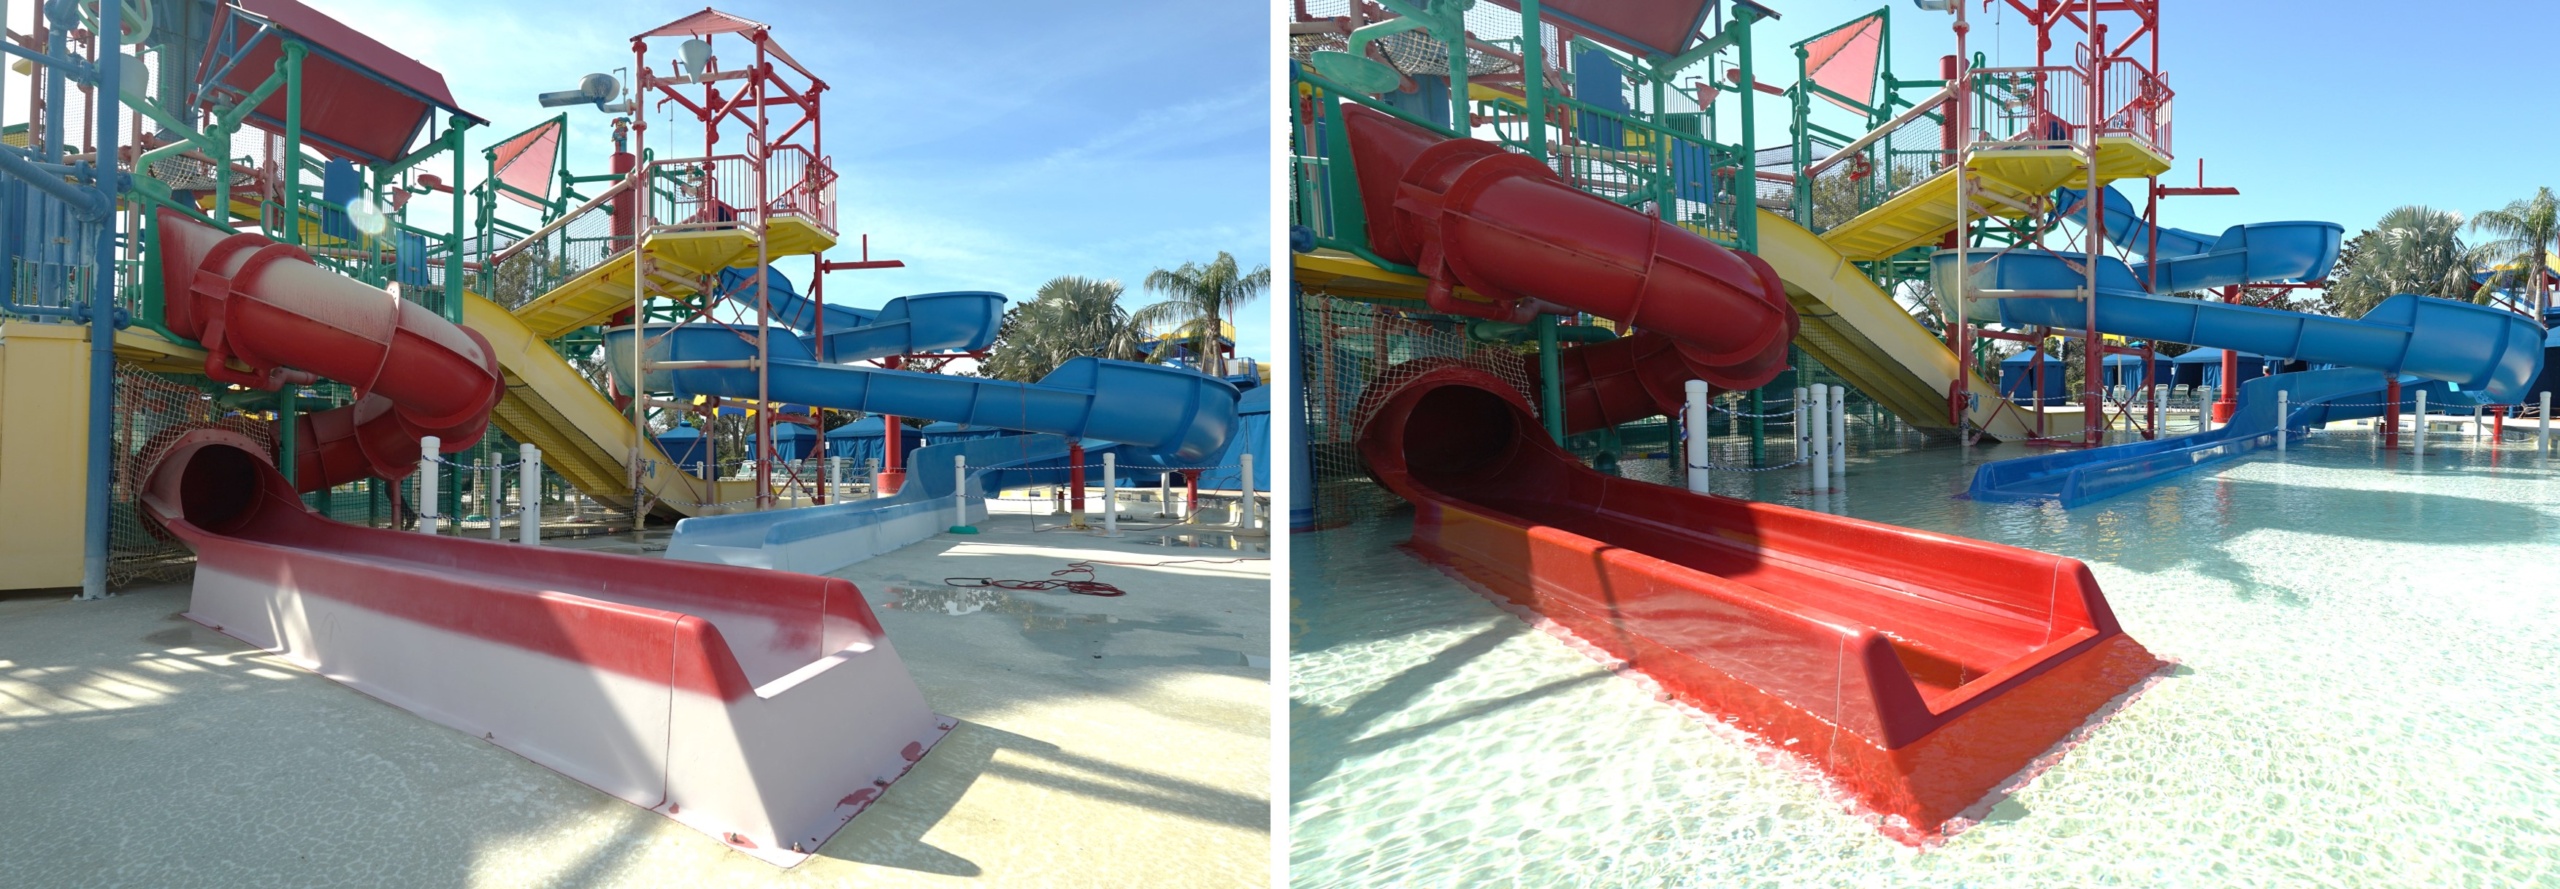 Red water slide restoration before and after comparison